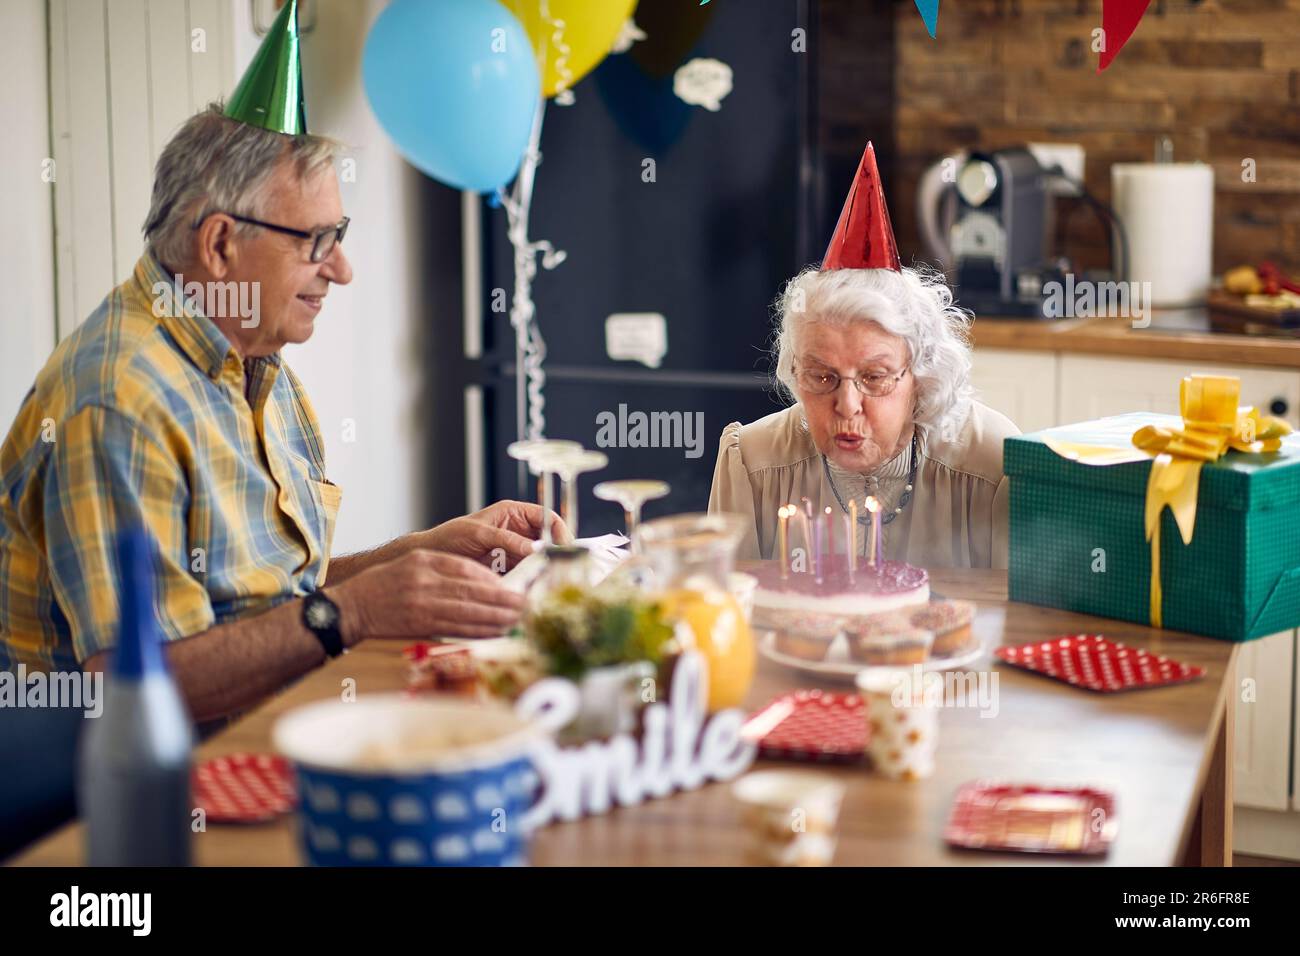 Happy senior woman blowing candles on her birthday cake, sitting at table with husband cheering her. Celebration, lifestyle, senior life concept. Stock Photo